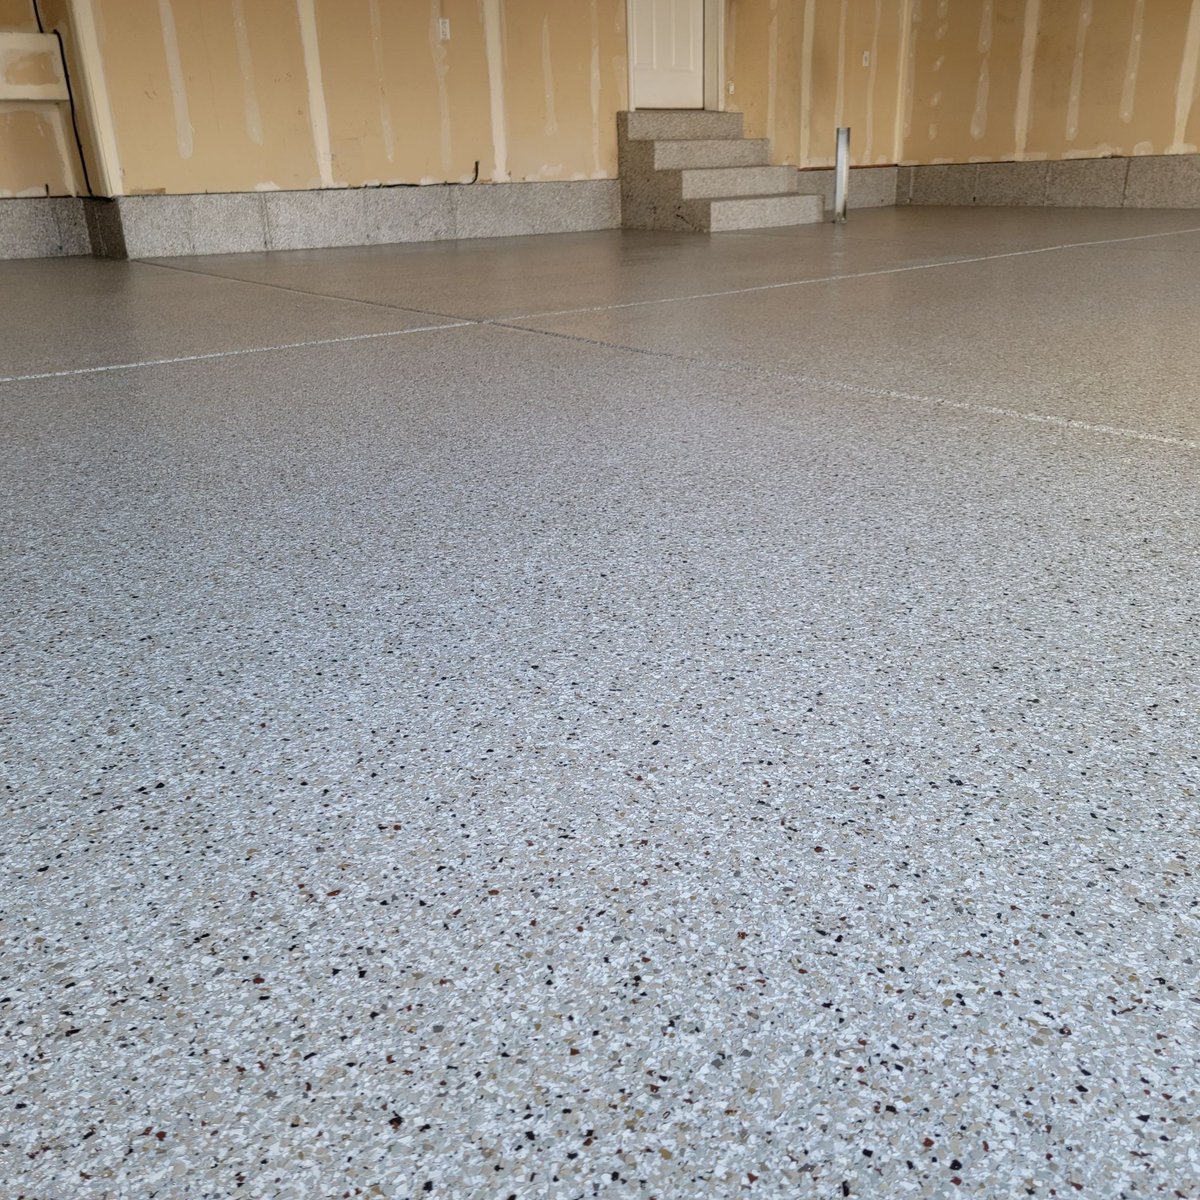 Tired of worn-out floors? Solid Custom Floor Coatings offers top-quality solutions for garages, basements, porches, and more. 

Let us help you transform your space with our durable and stylish floor coatings: bit.ly/3dmA29f 

#EpoxyFloors #HomeUpgrade